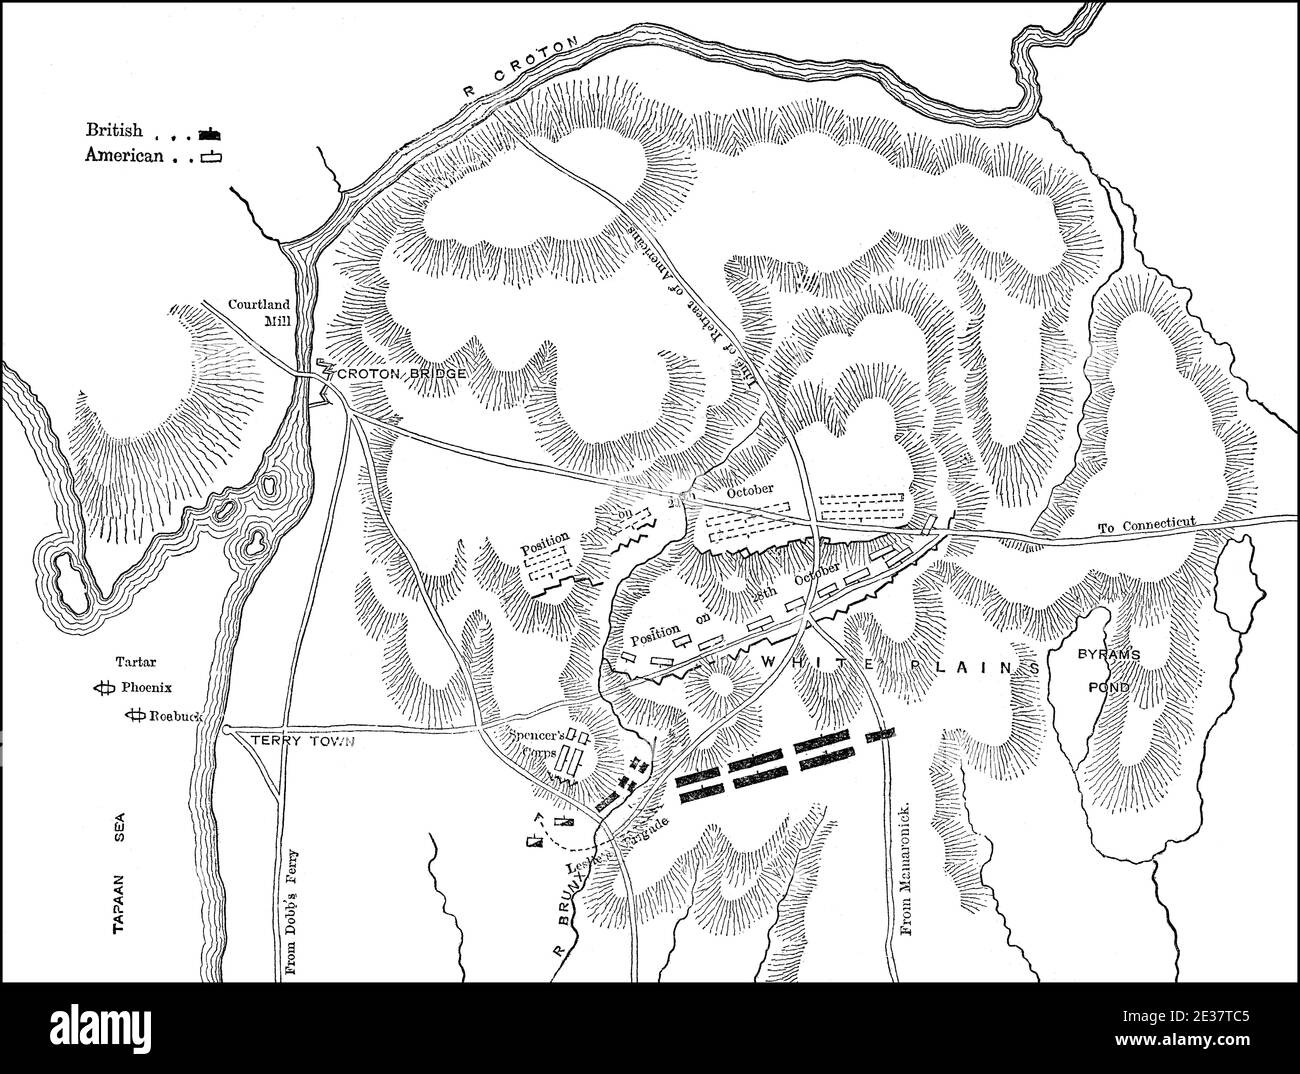 Plan  of the Battle of White Plains, New York and New Jersey campaign on October 28, 1776, American Revolutionary War Stock Photo